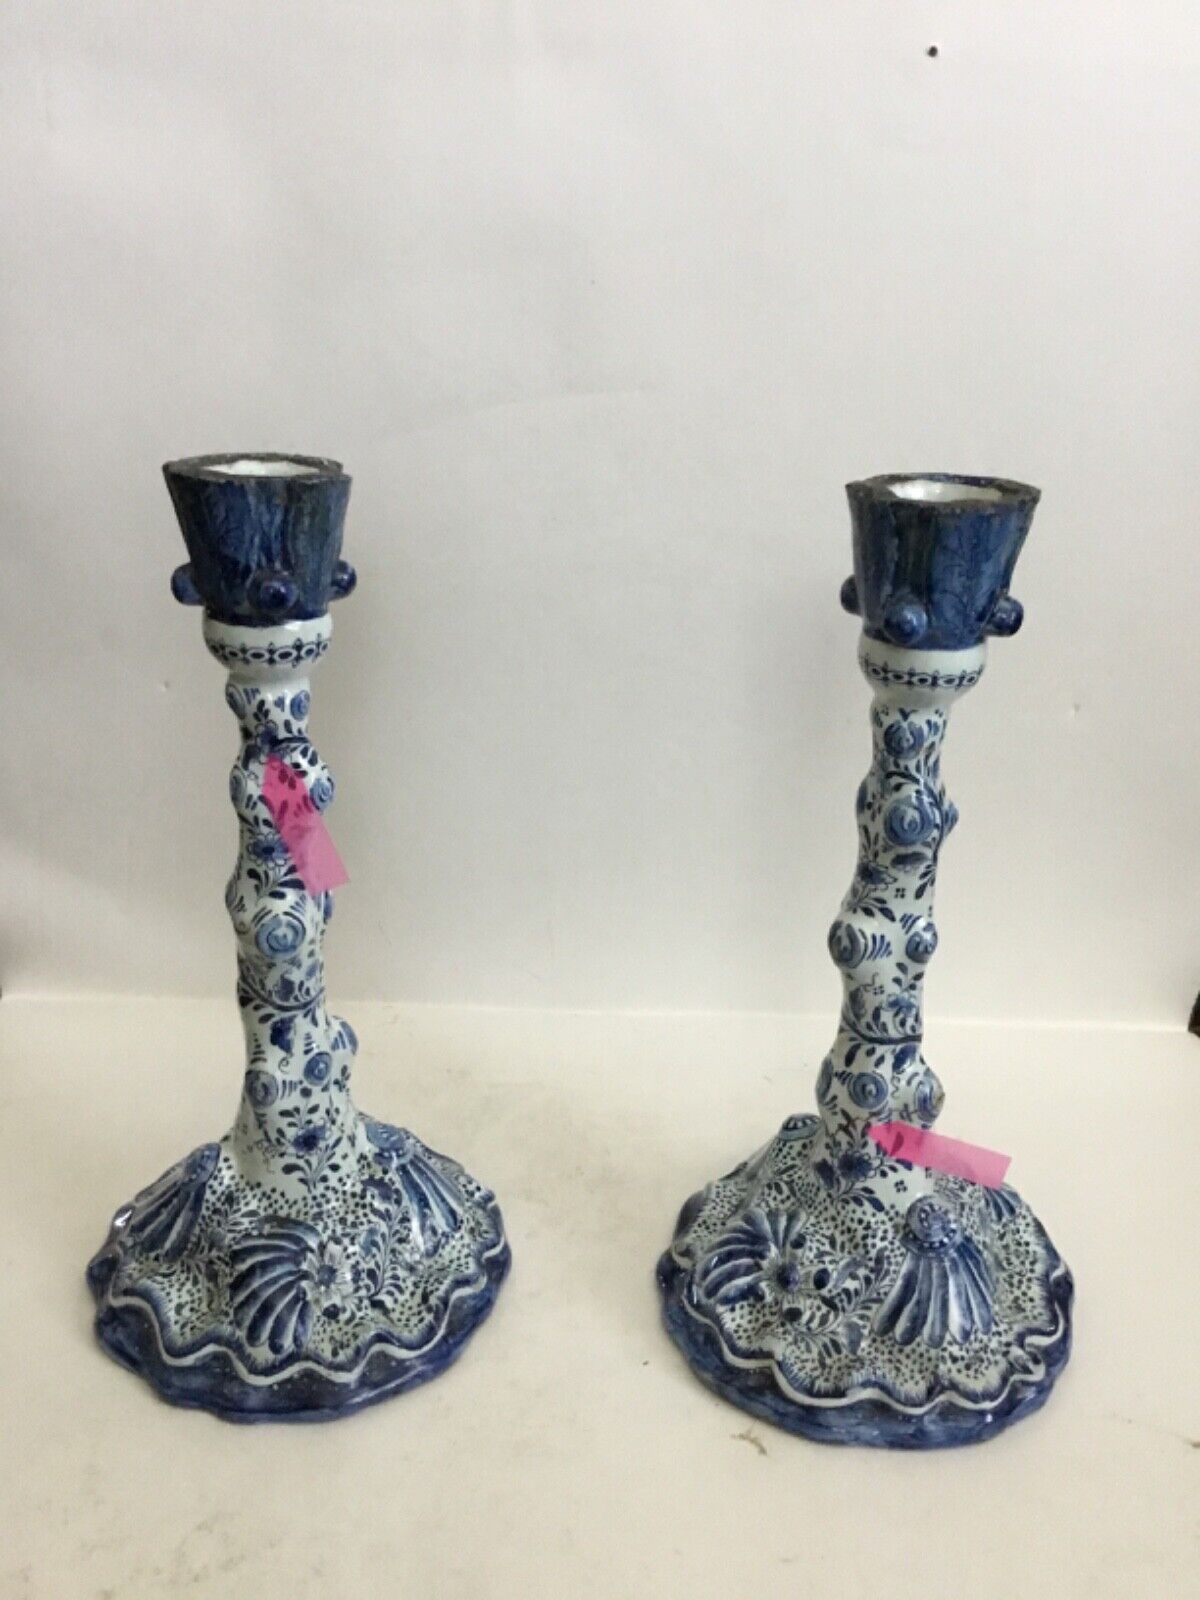 Rare Antique Pair Of Early 19th Century Delft Candlesticks Moulded As Tree Trunk